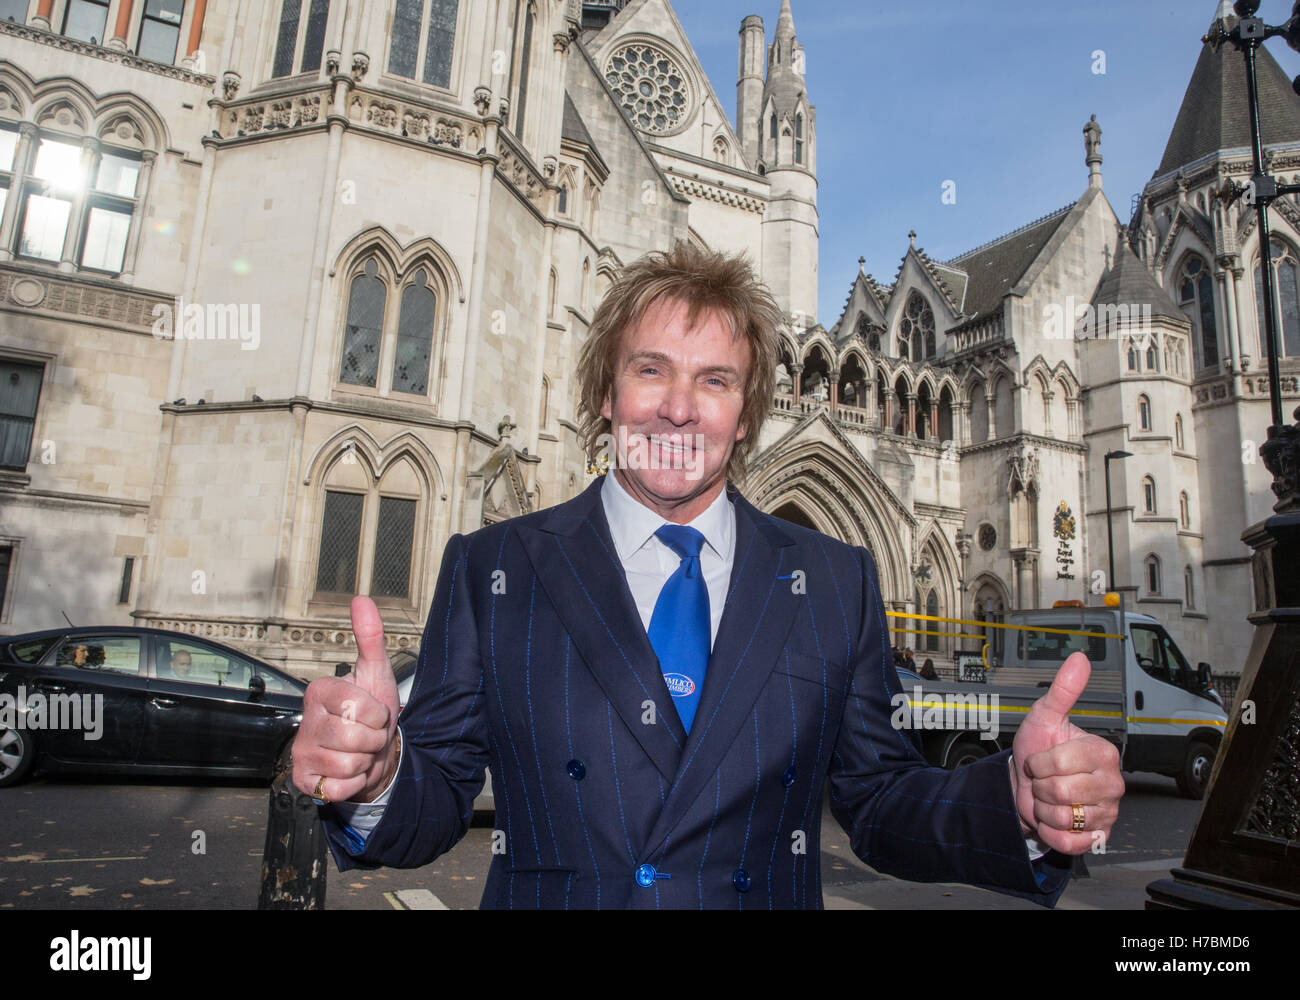 Managing Director of Pimlico Plumbers,Charlie Mullins,gives the thumbs up after the judges gave their verdict on the Brexit case Stock Photo